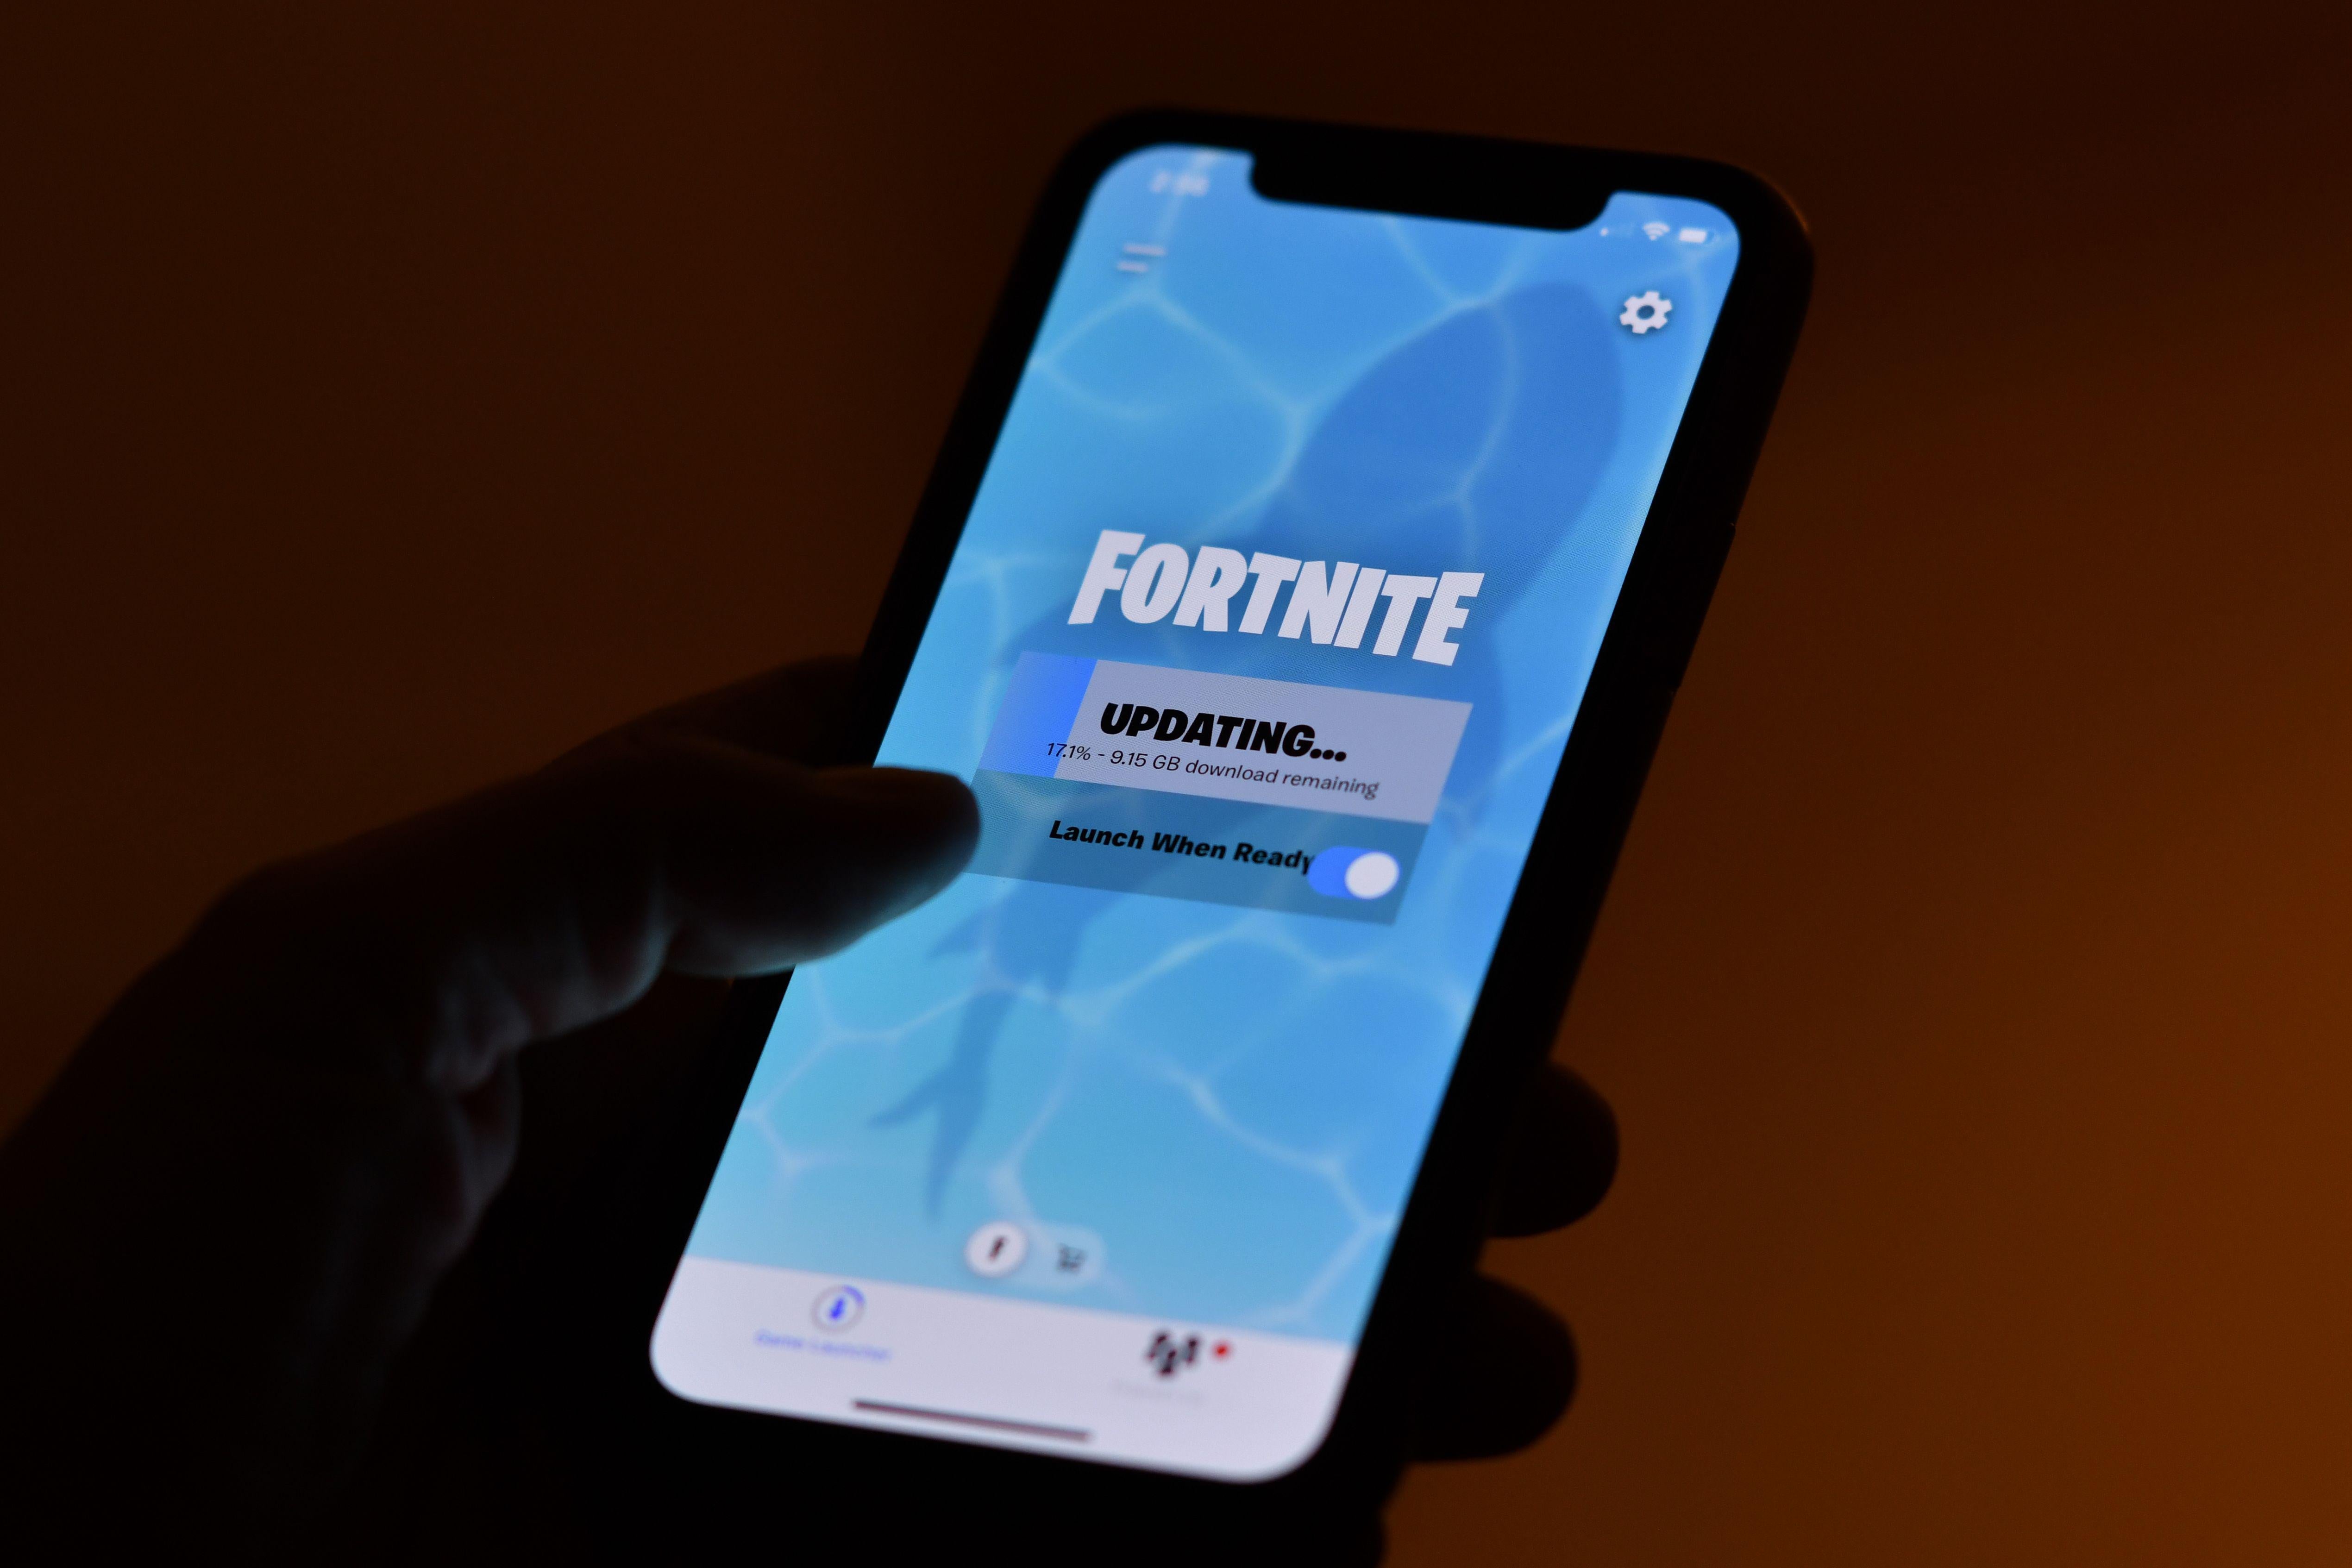 Fortnite updating on the screen of a smartphone in someone's hand